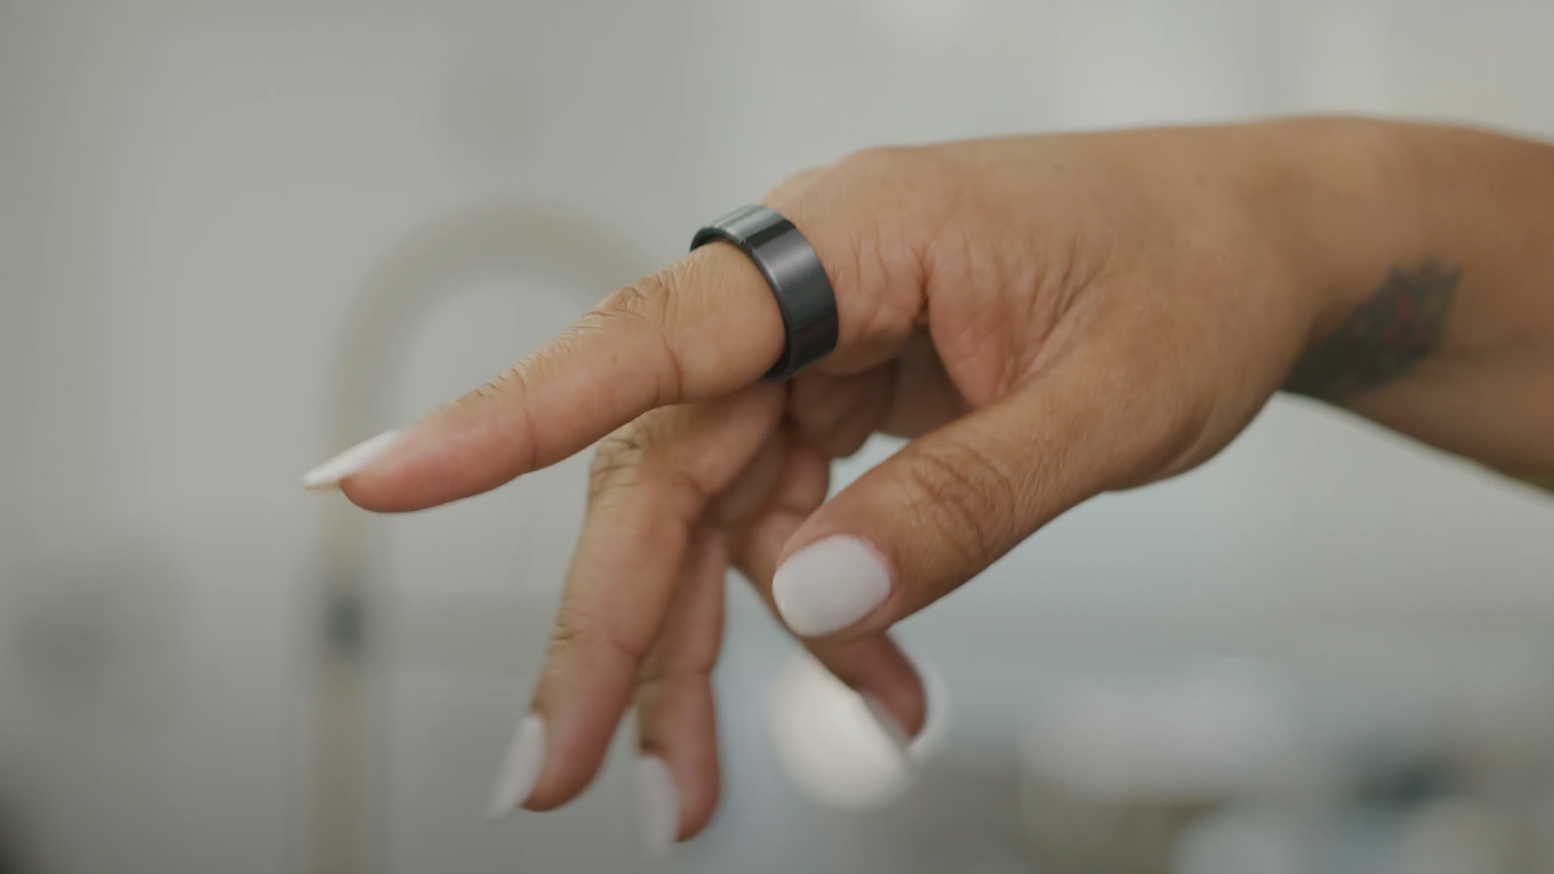 A hand wearing the Lotus Ring controller